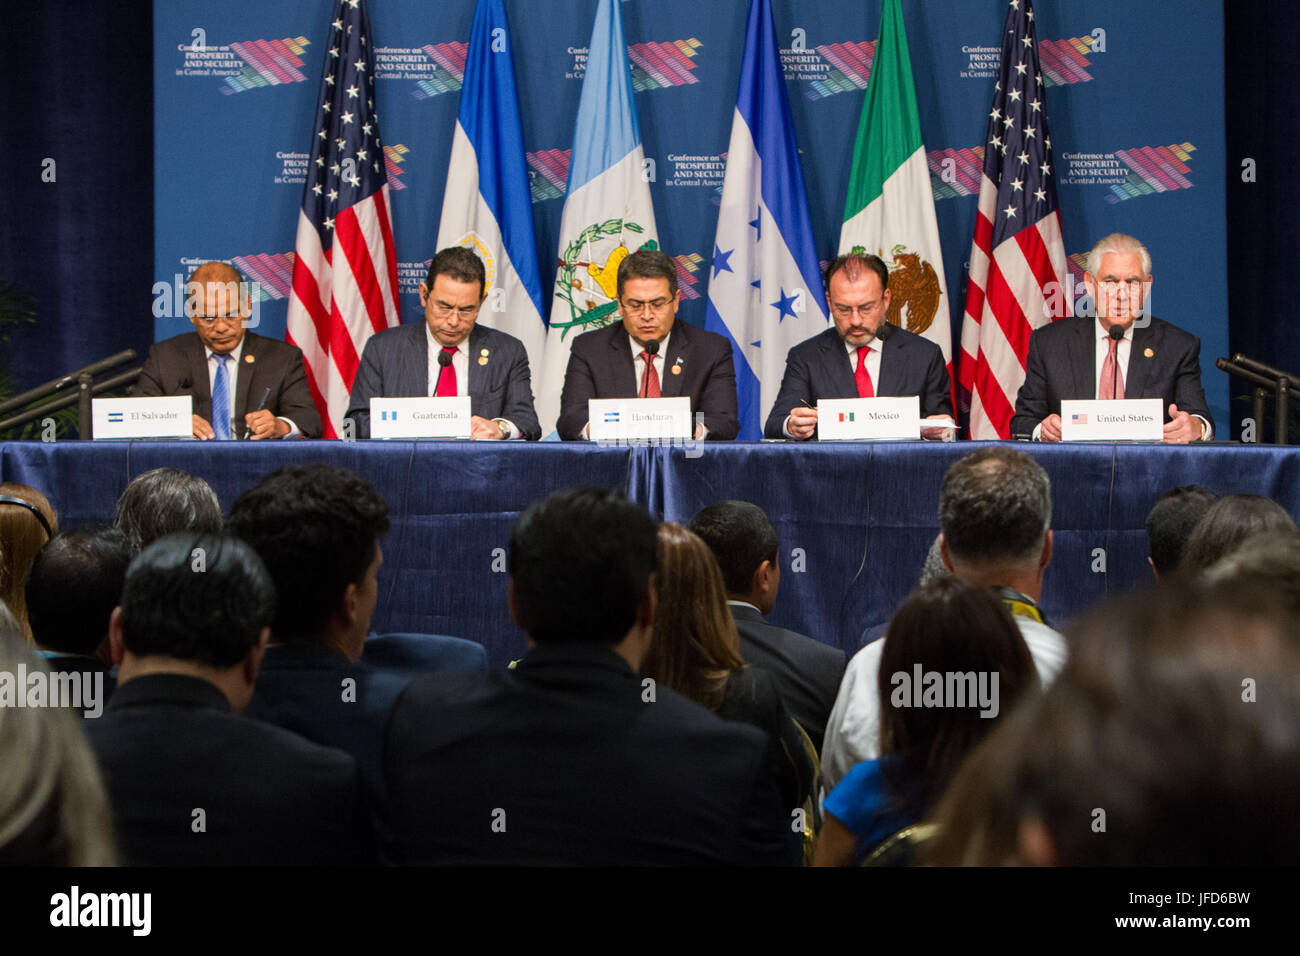 U.S. Secretary of State Rex Tillerson delivers a statement during the joint press availability with Central American counterparts from Mexico, Honduras, Guatemala, and El Salvador at the Conference for Prosperity and Security in Central America, at Florida International University, in Miami, Florida, on June 15, 2017. Stock Photo